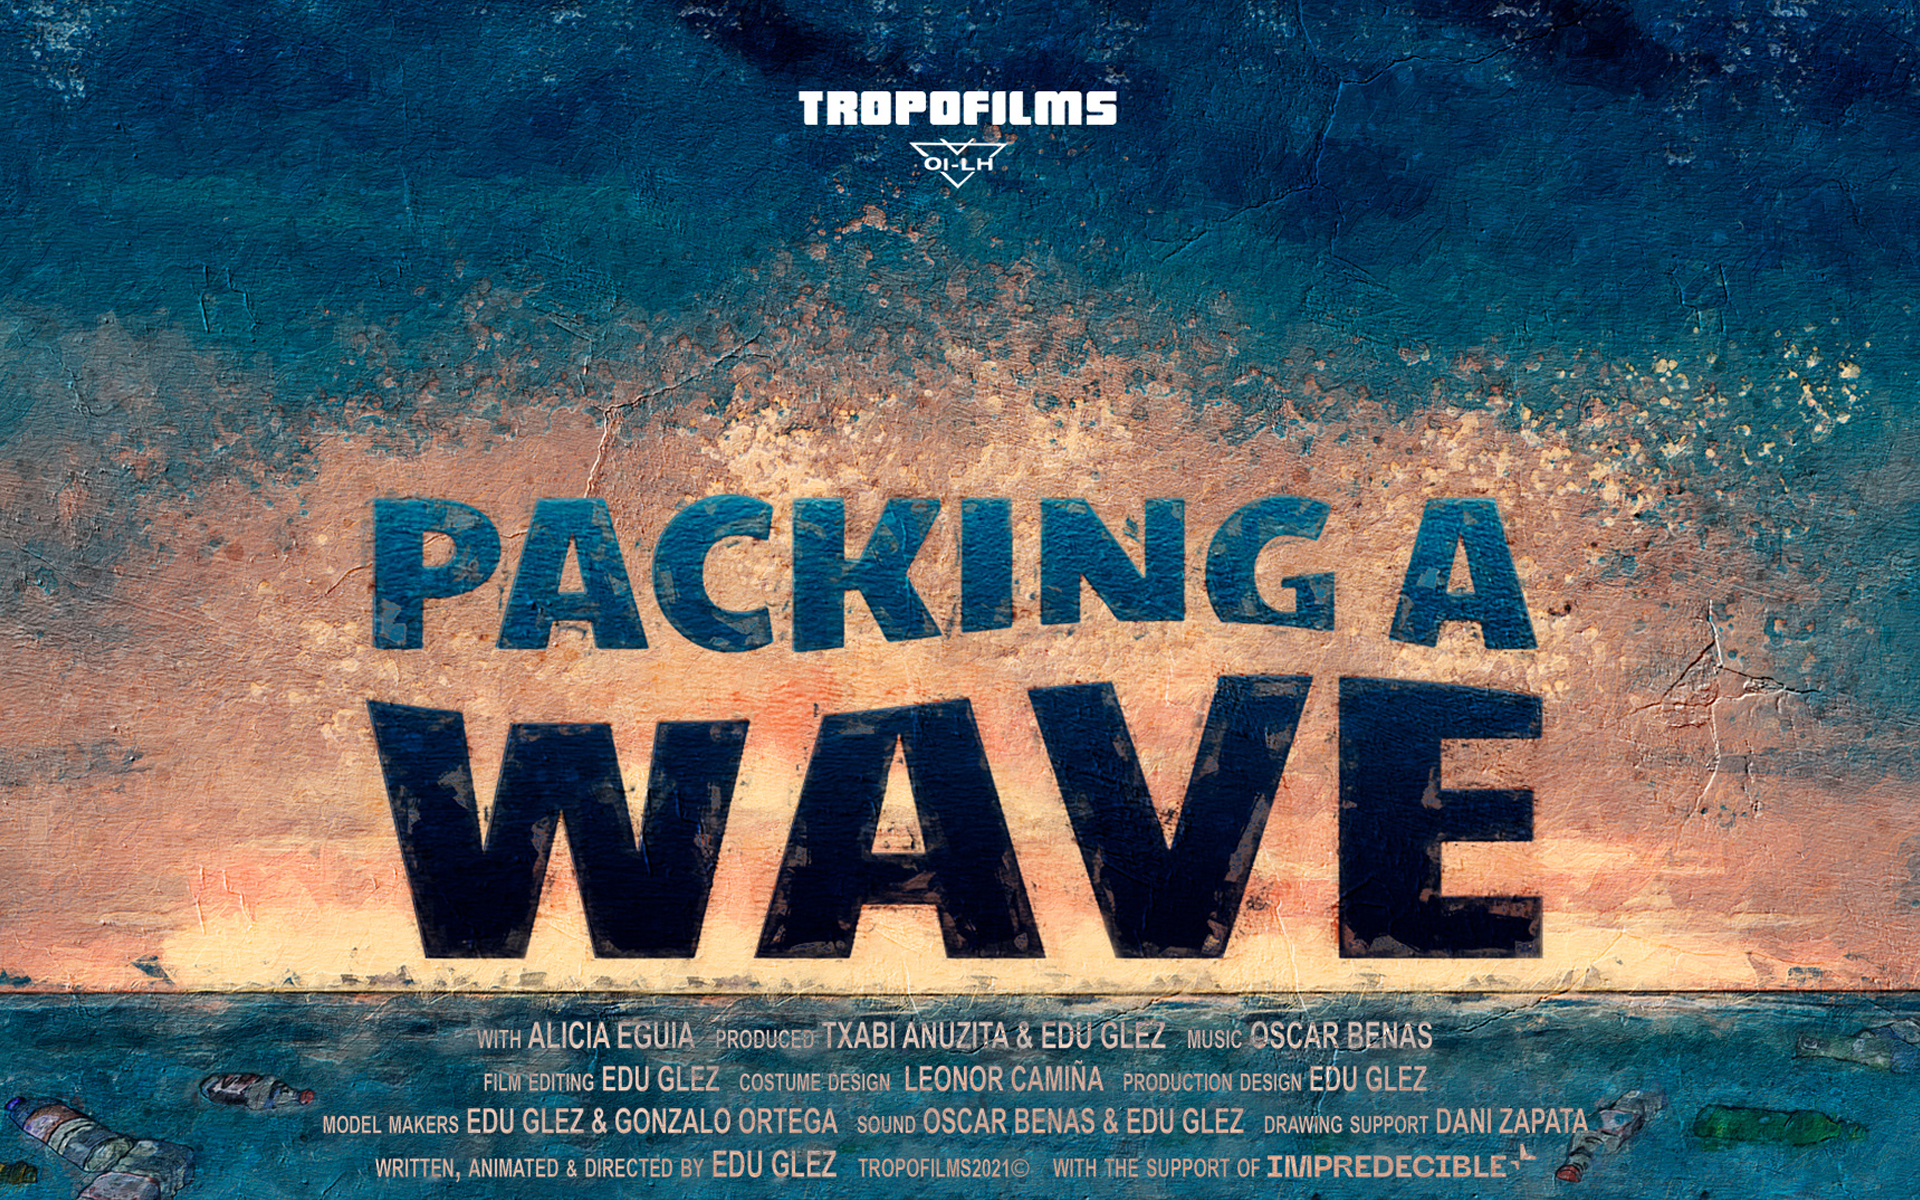 Packing a wave